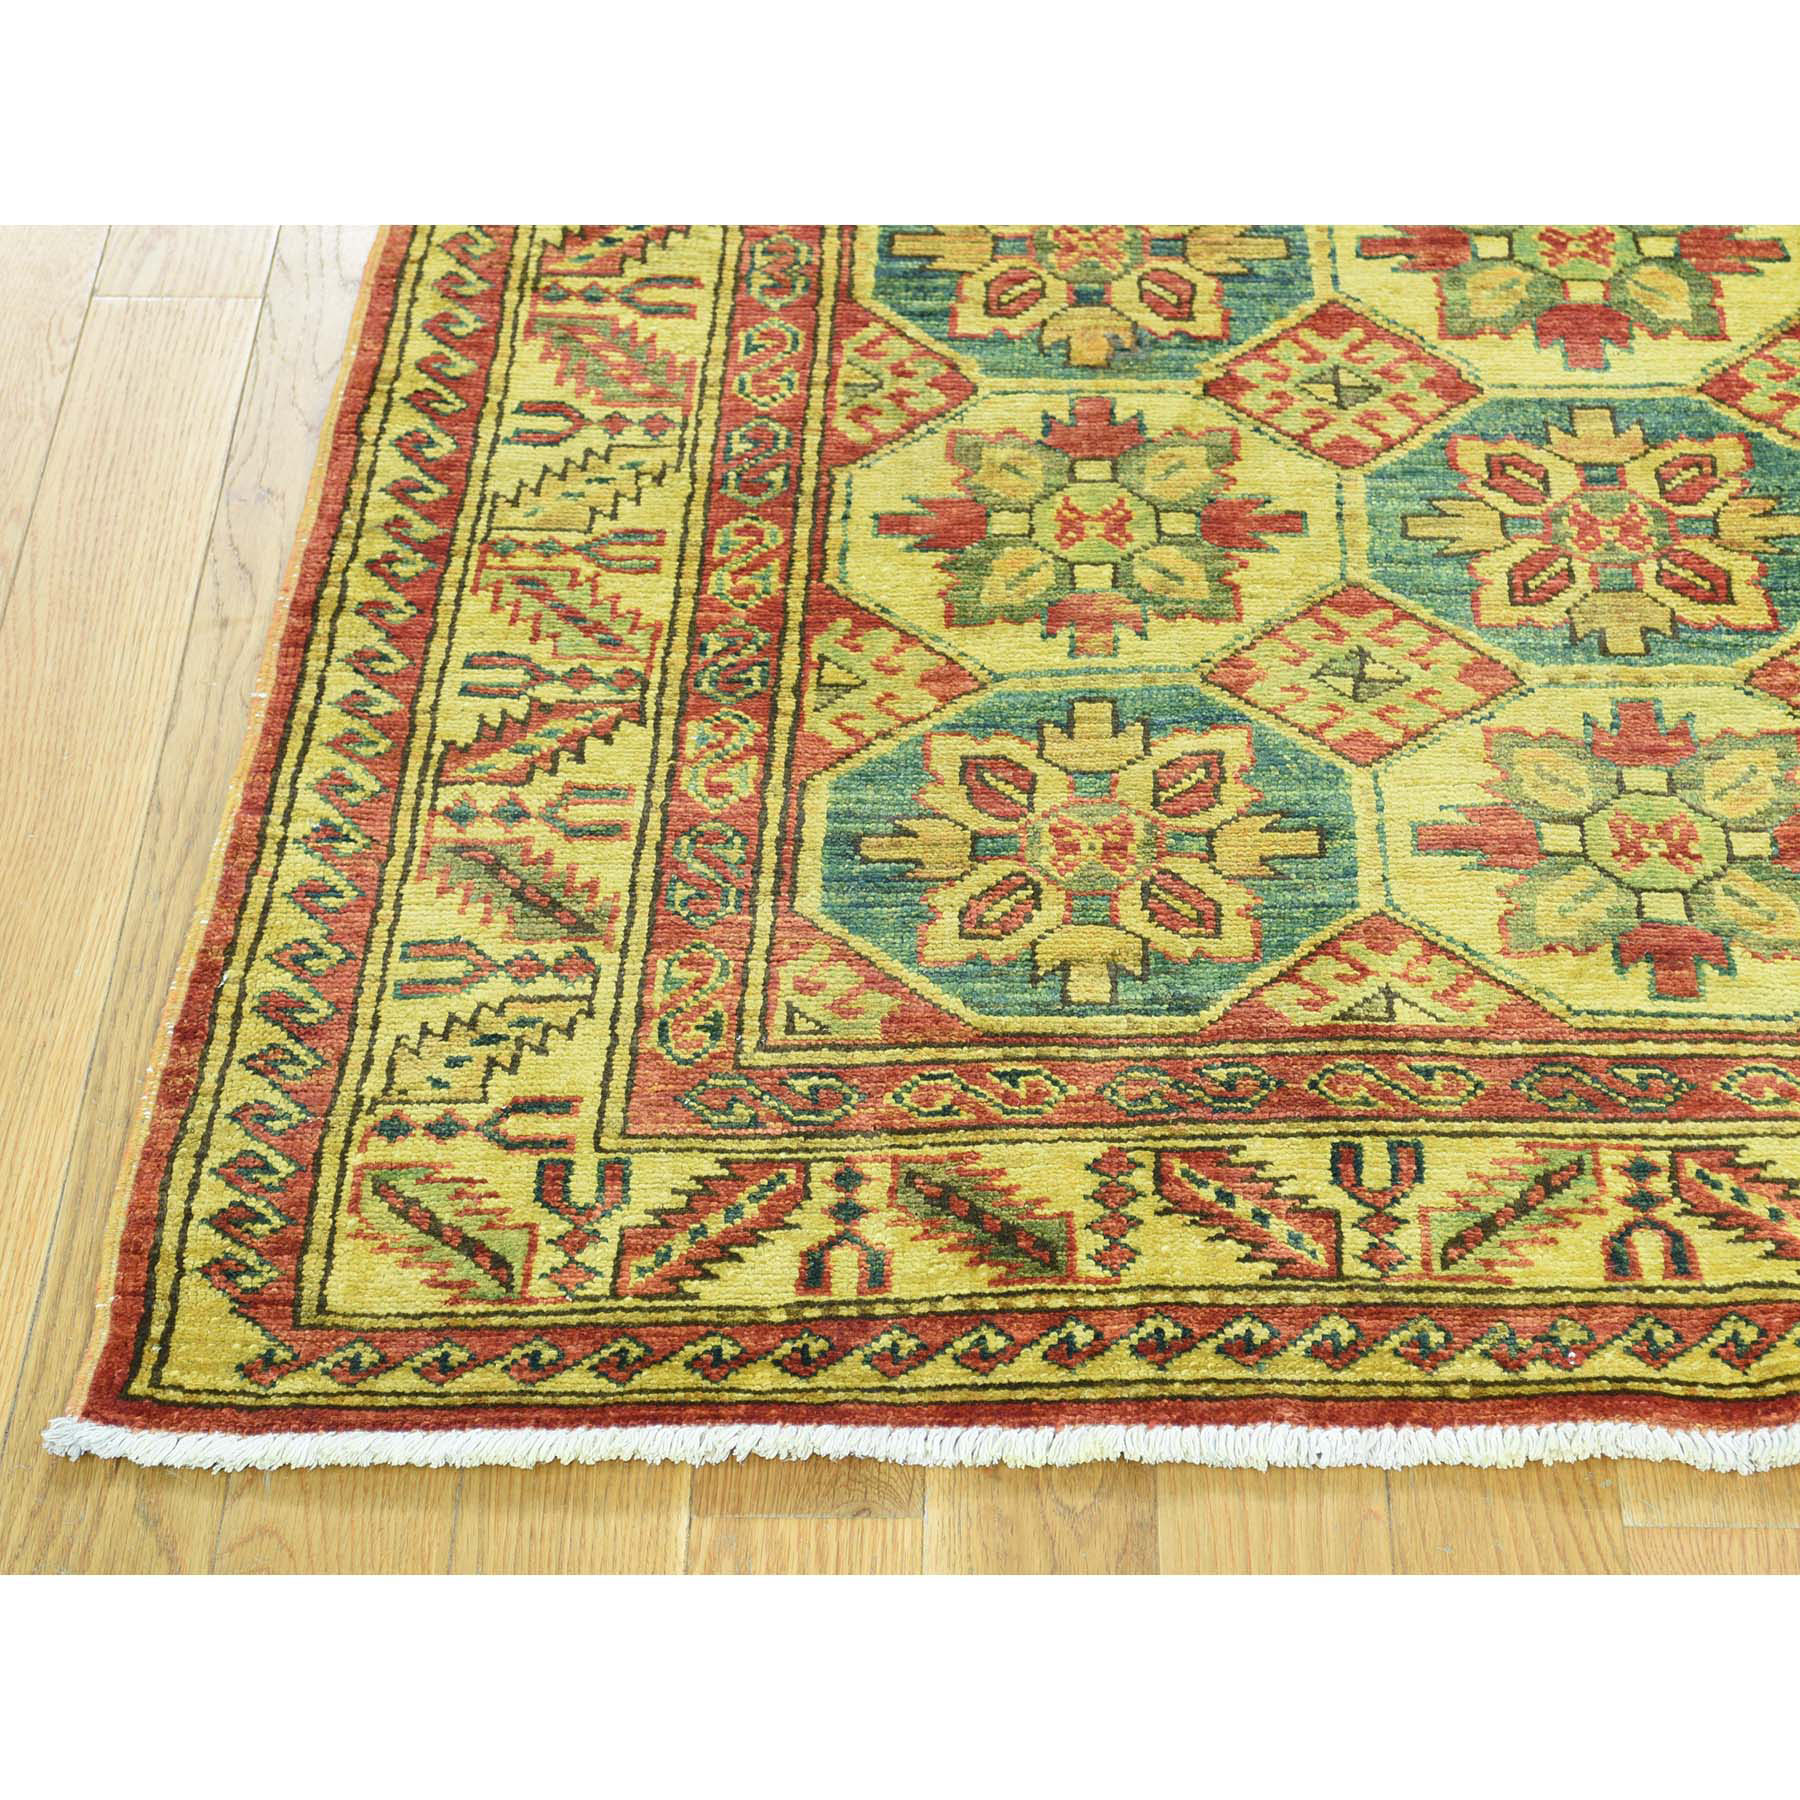 4-9 x6-7  Overdyed Super Kazak Hand-Knotted Pure Wool Oriental Rug 